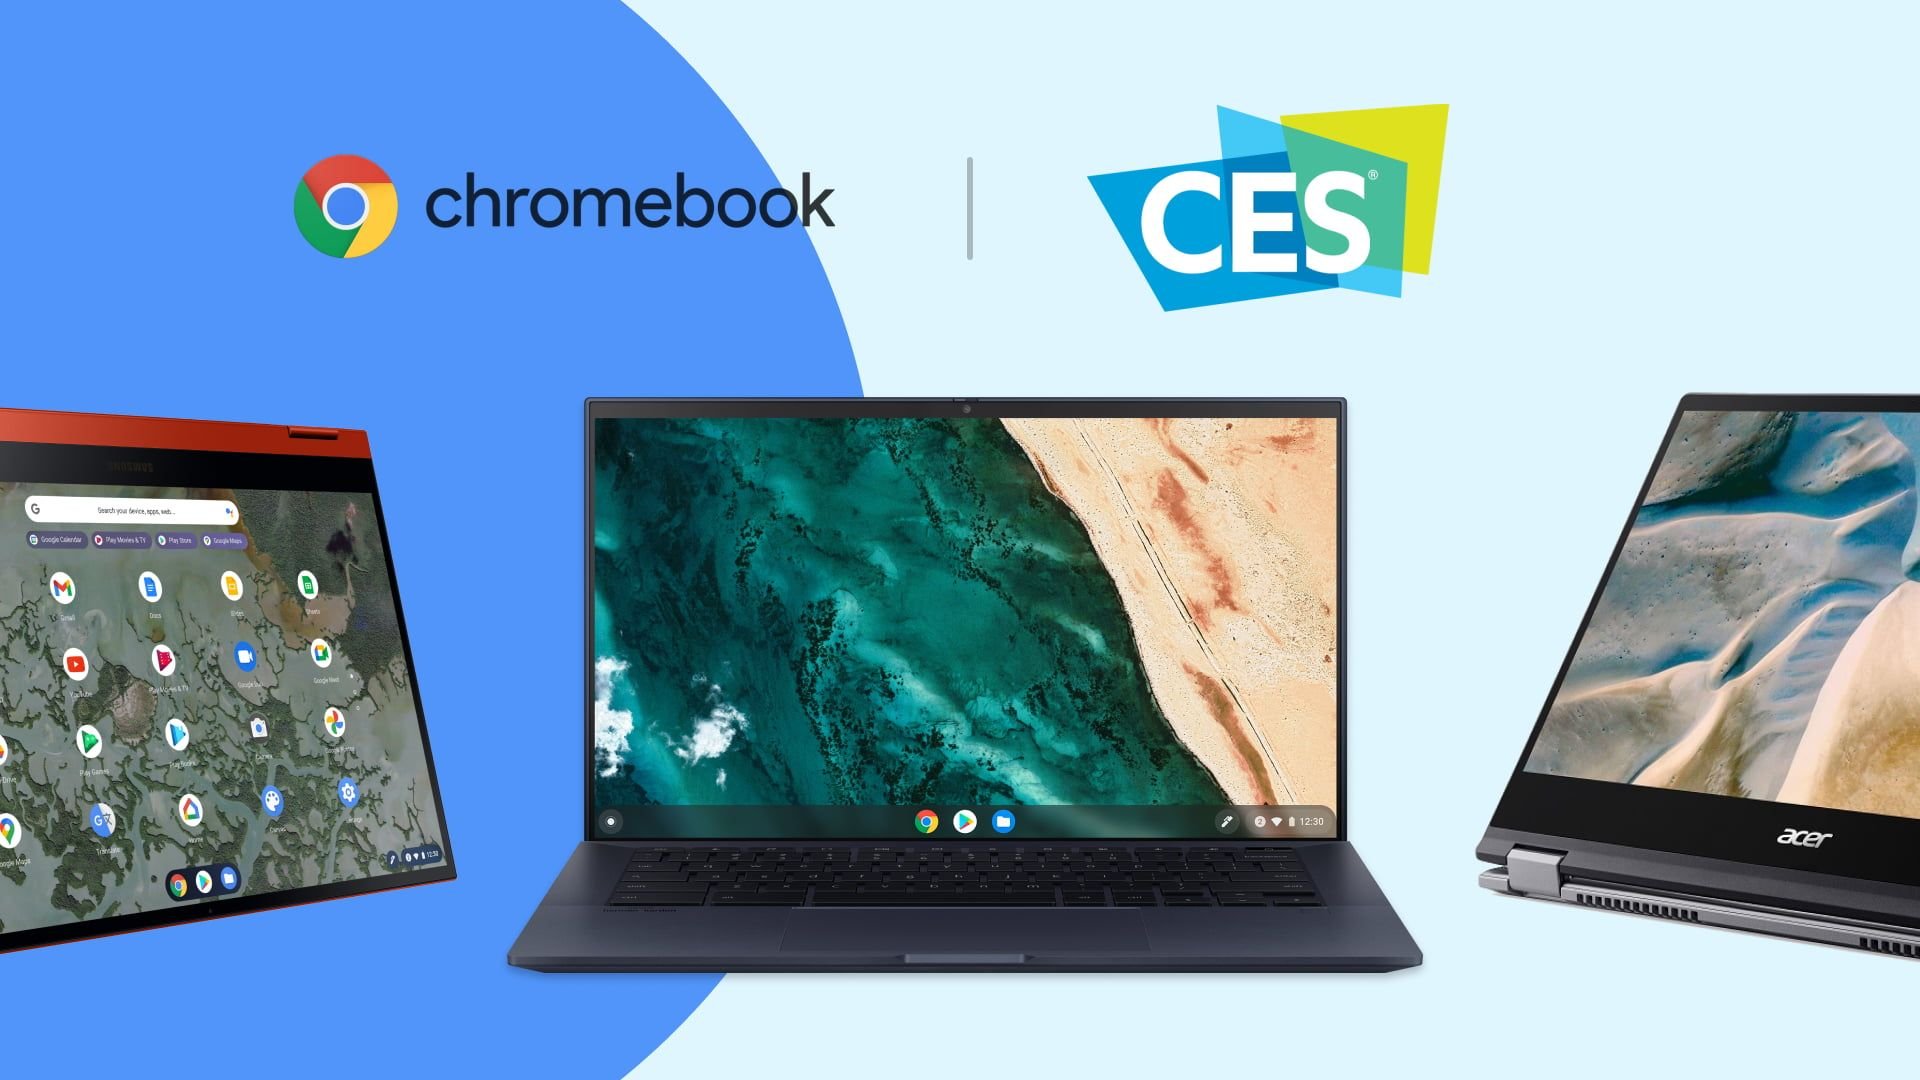 Every new Chromebook and Chromebox announced at CES 2021